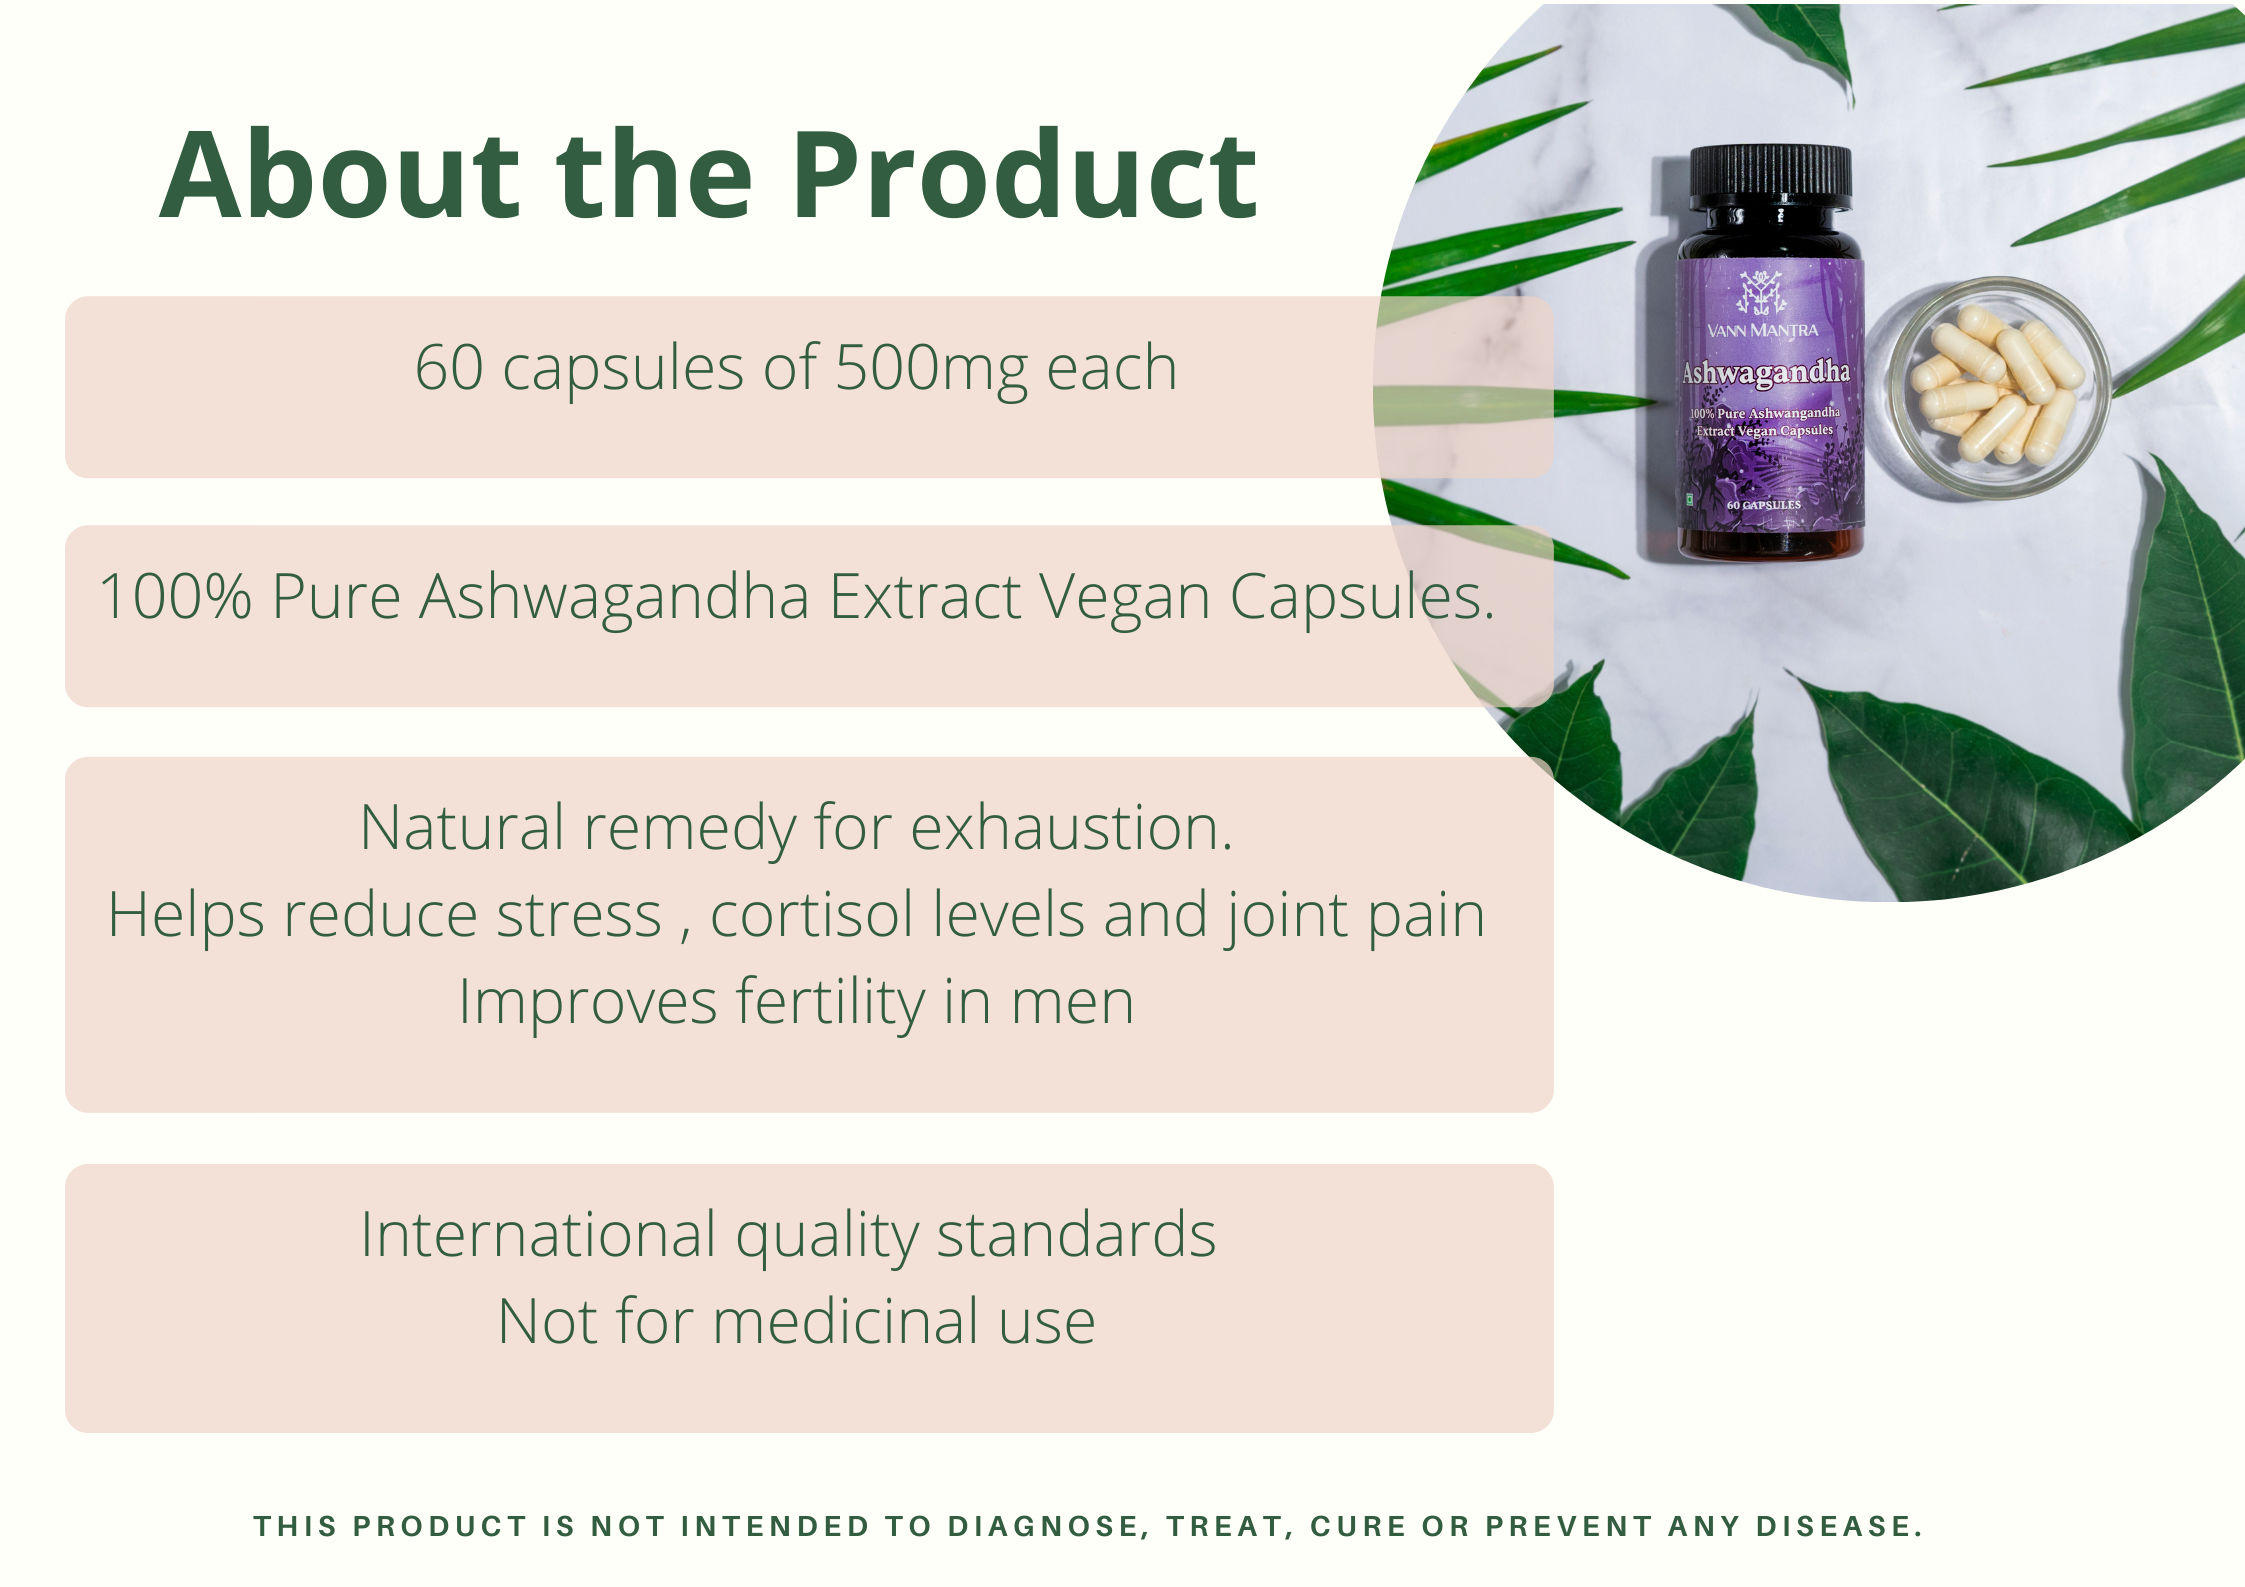 Infographic explaining the features and benefits of Ashwagandha Capsule. 